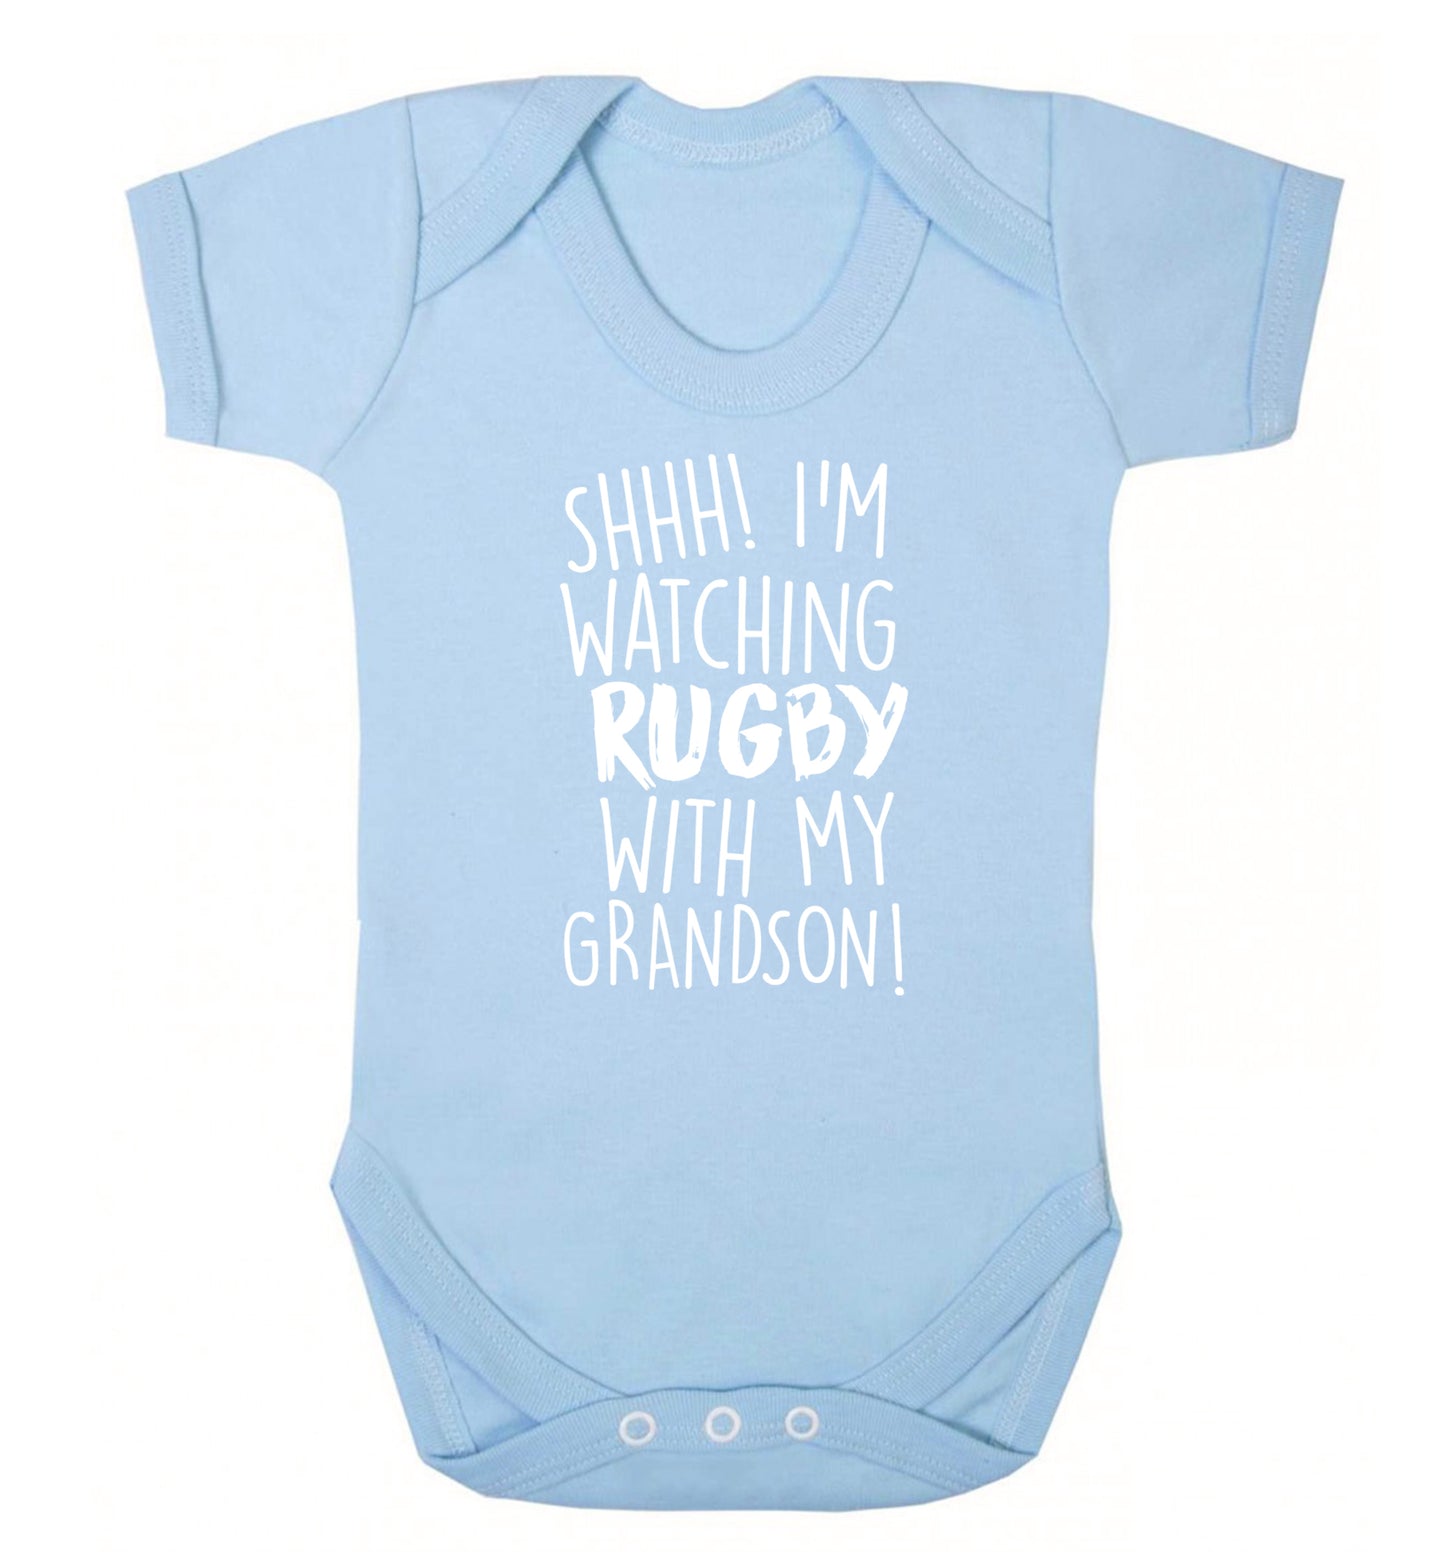 Shh I'm watching rugby with my grandson Baby Vest pale blue 18-24 months